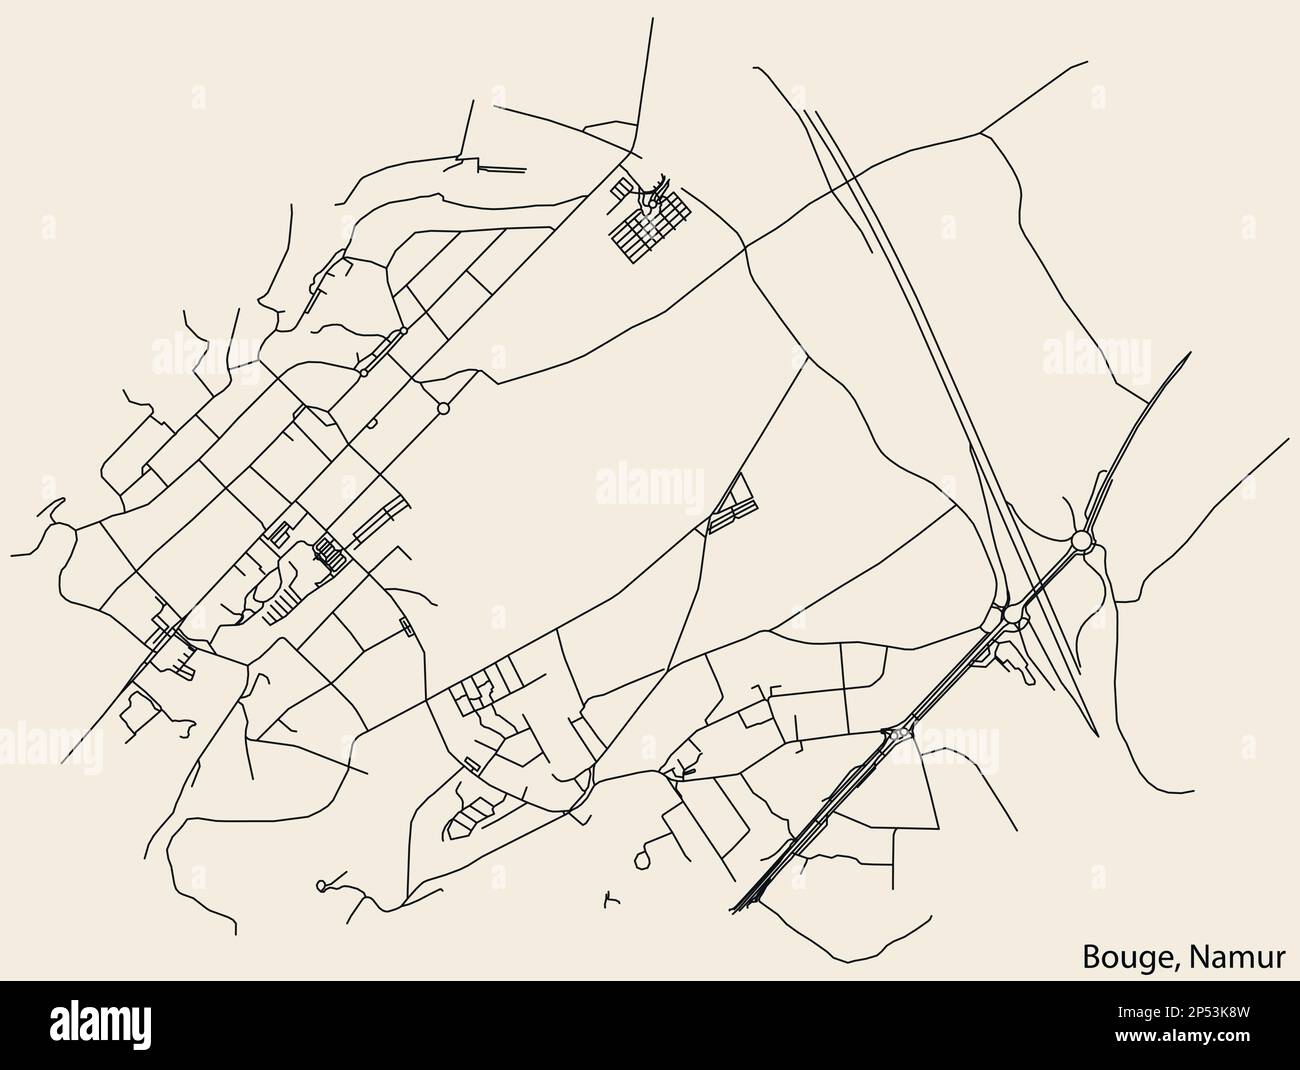 Street roads map of the BOUGE DISTRICT, NAMUR Stock Vector